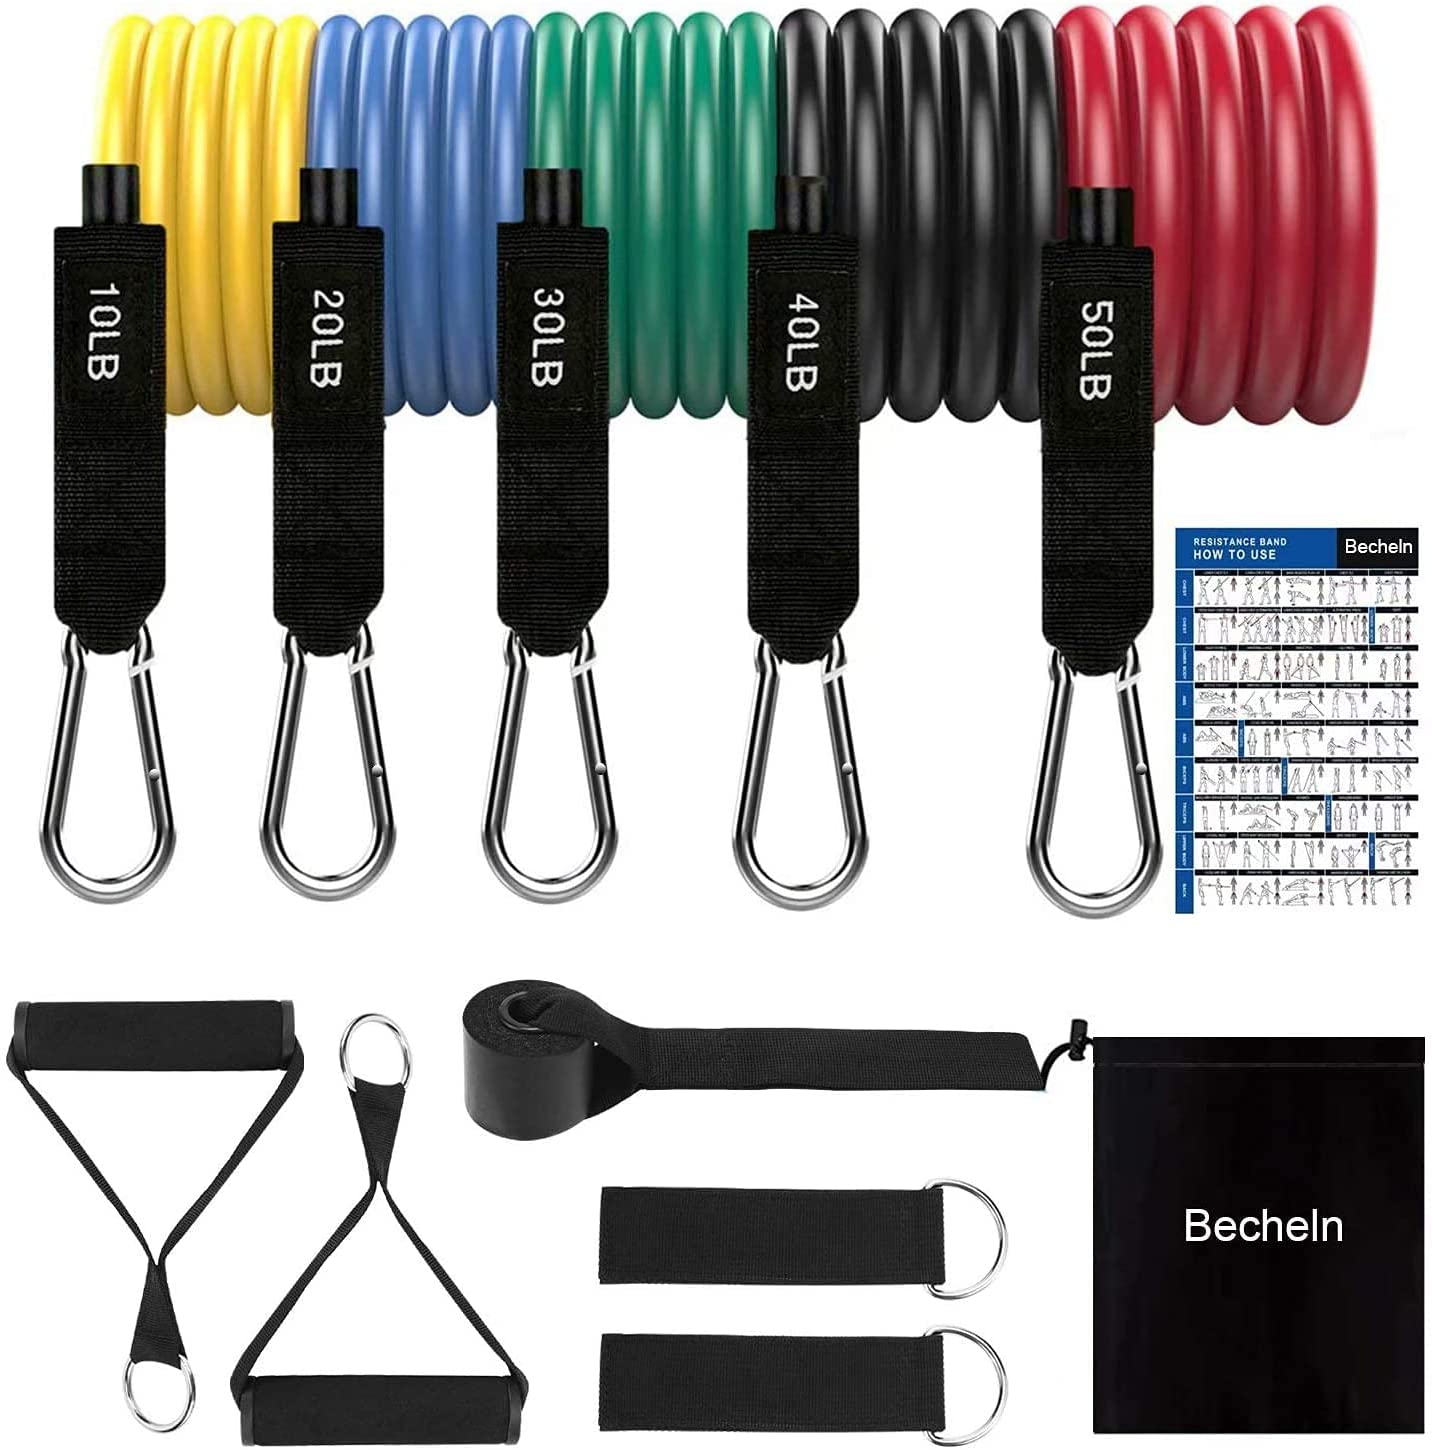 Camecho Premium Resistance Bands Set, Workout Bands - with Door Anchor, Handles and Ankle Straps